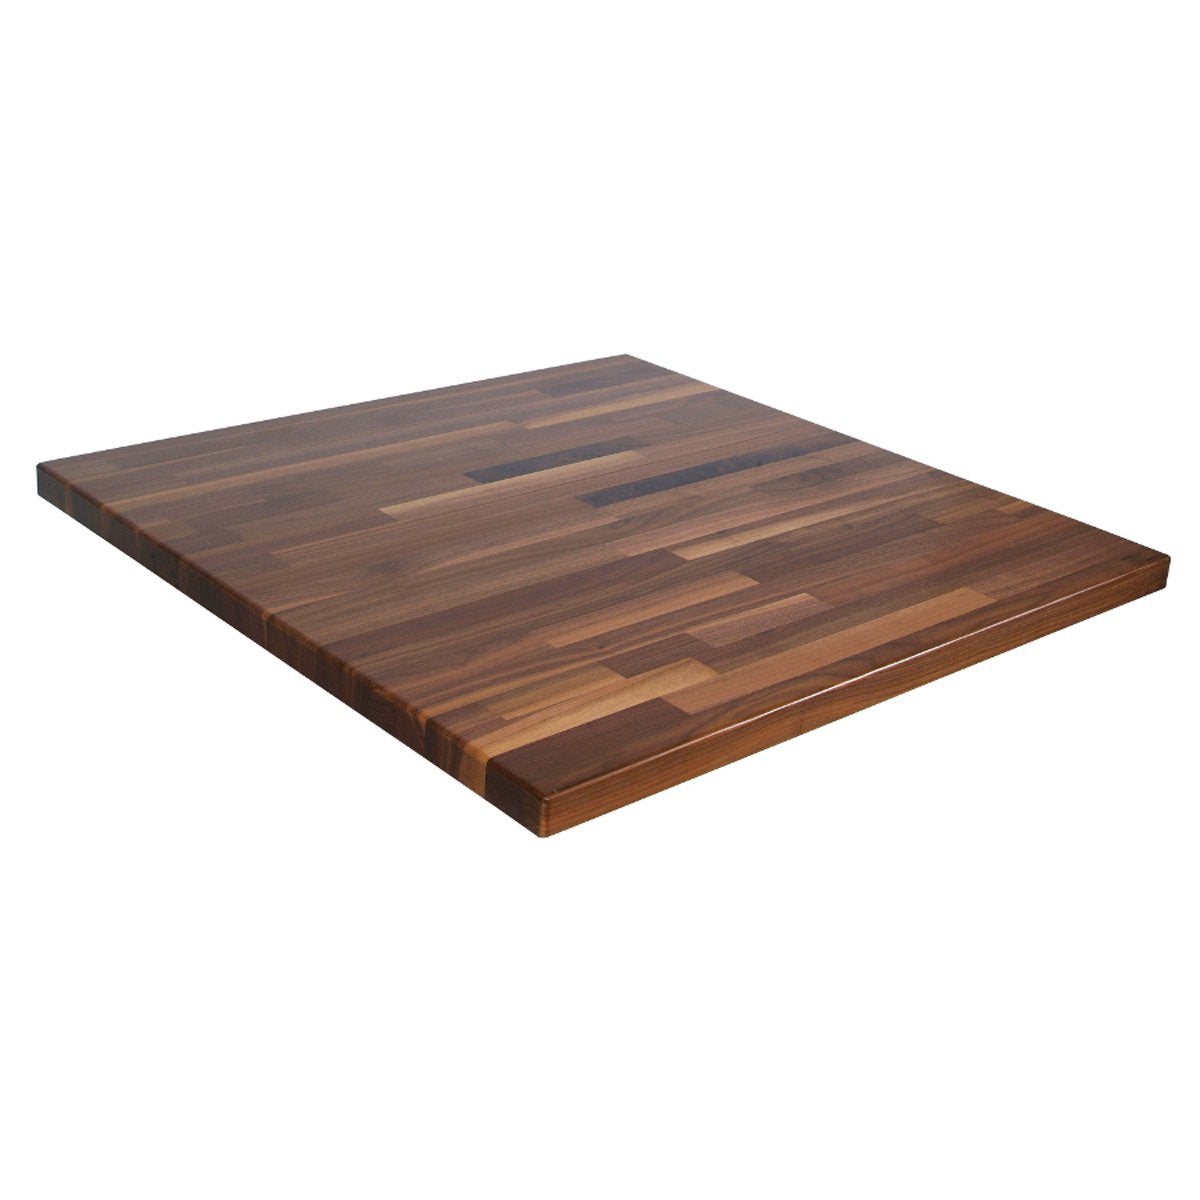 John Boos WALKCT-BL14525-O Blended Walnut 25 Wide Kitchen Counter Top, 1-1/2 Thick, 145 x 25, Oil Finish